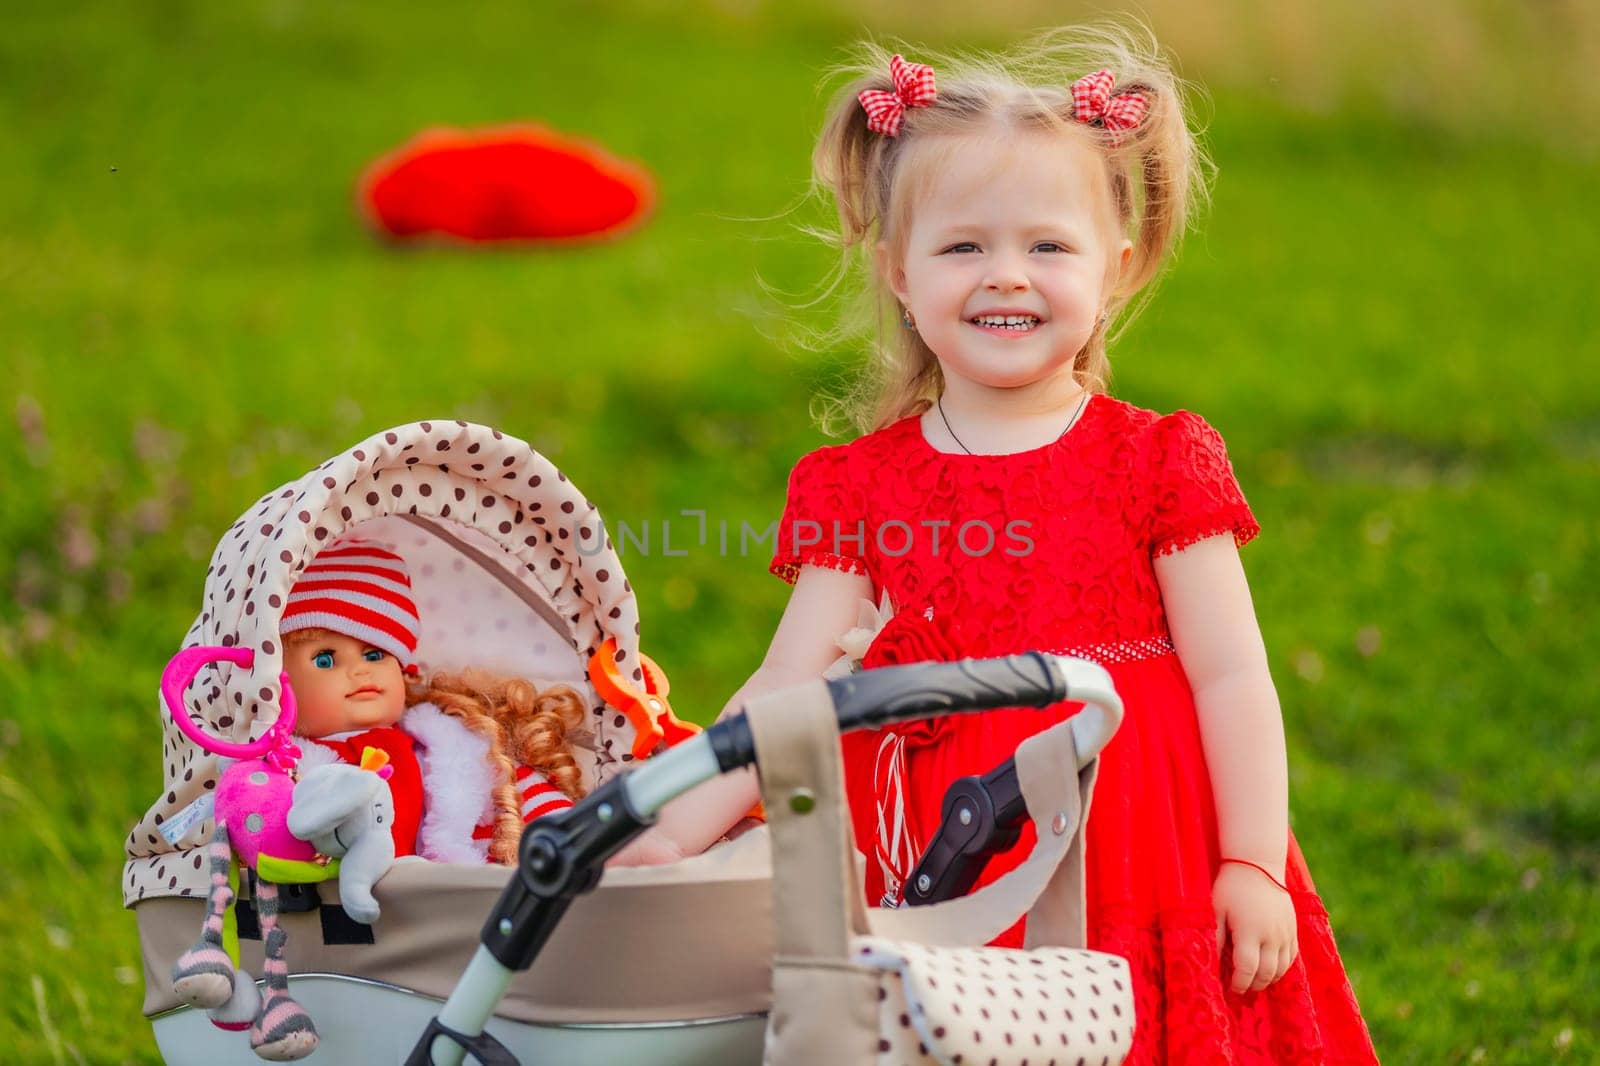 little girl plays with a doll and a stroller on the lawn